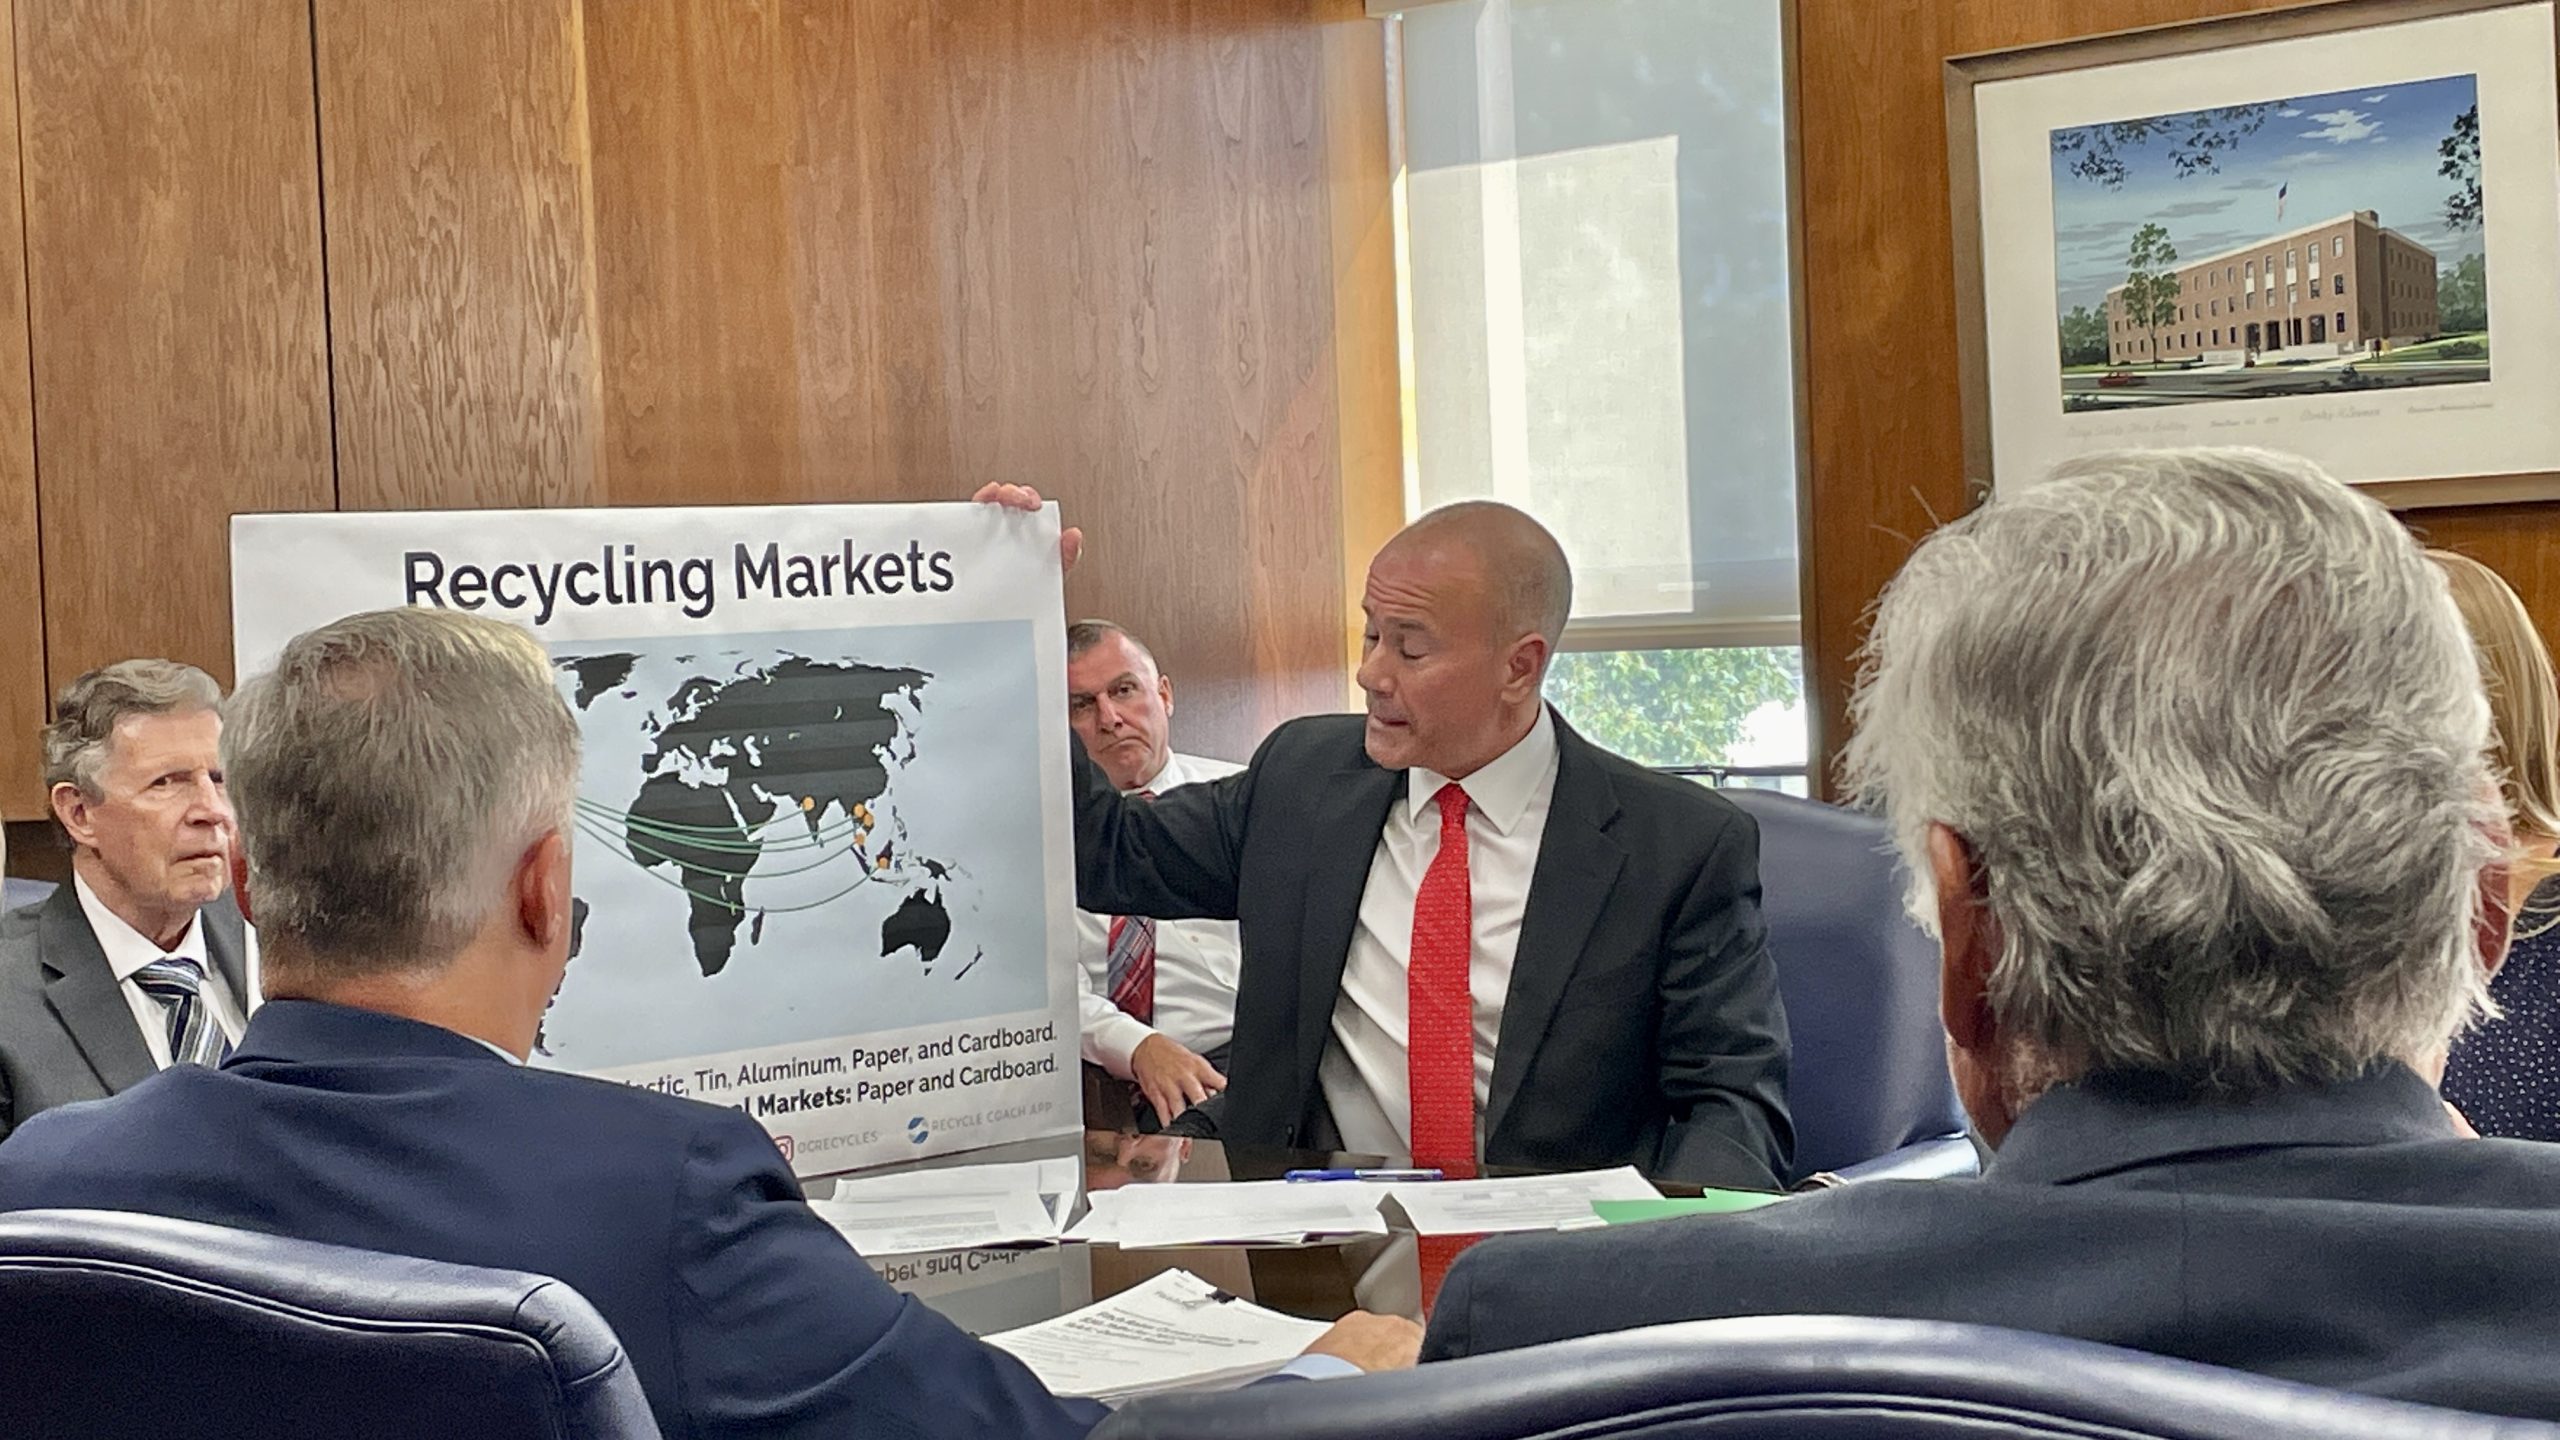 Ocean County Planning Director Anthony Agliata explains recycling export markets to the Board of Commissioners, Aug. 31, 2022. (Photo: Daniel Nee)